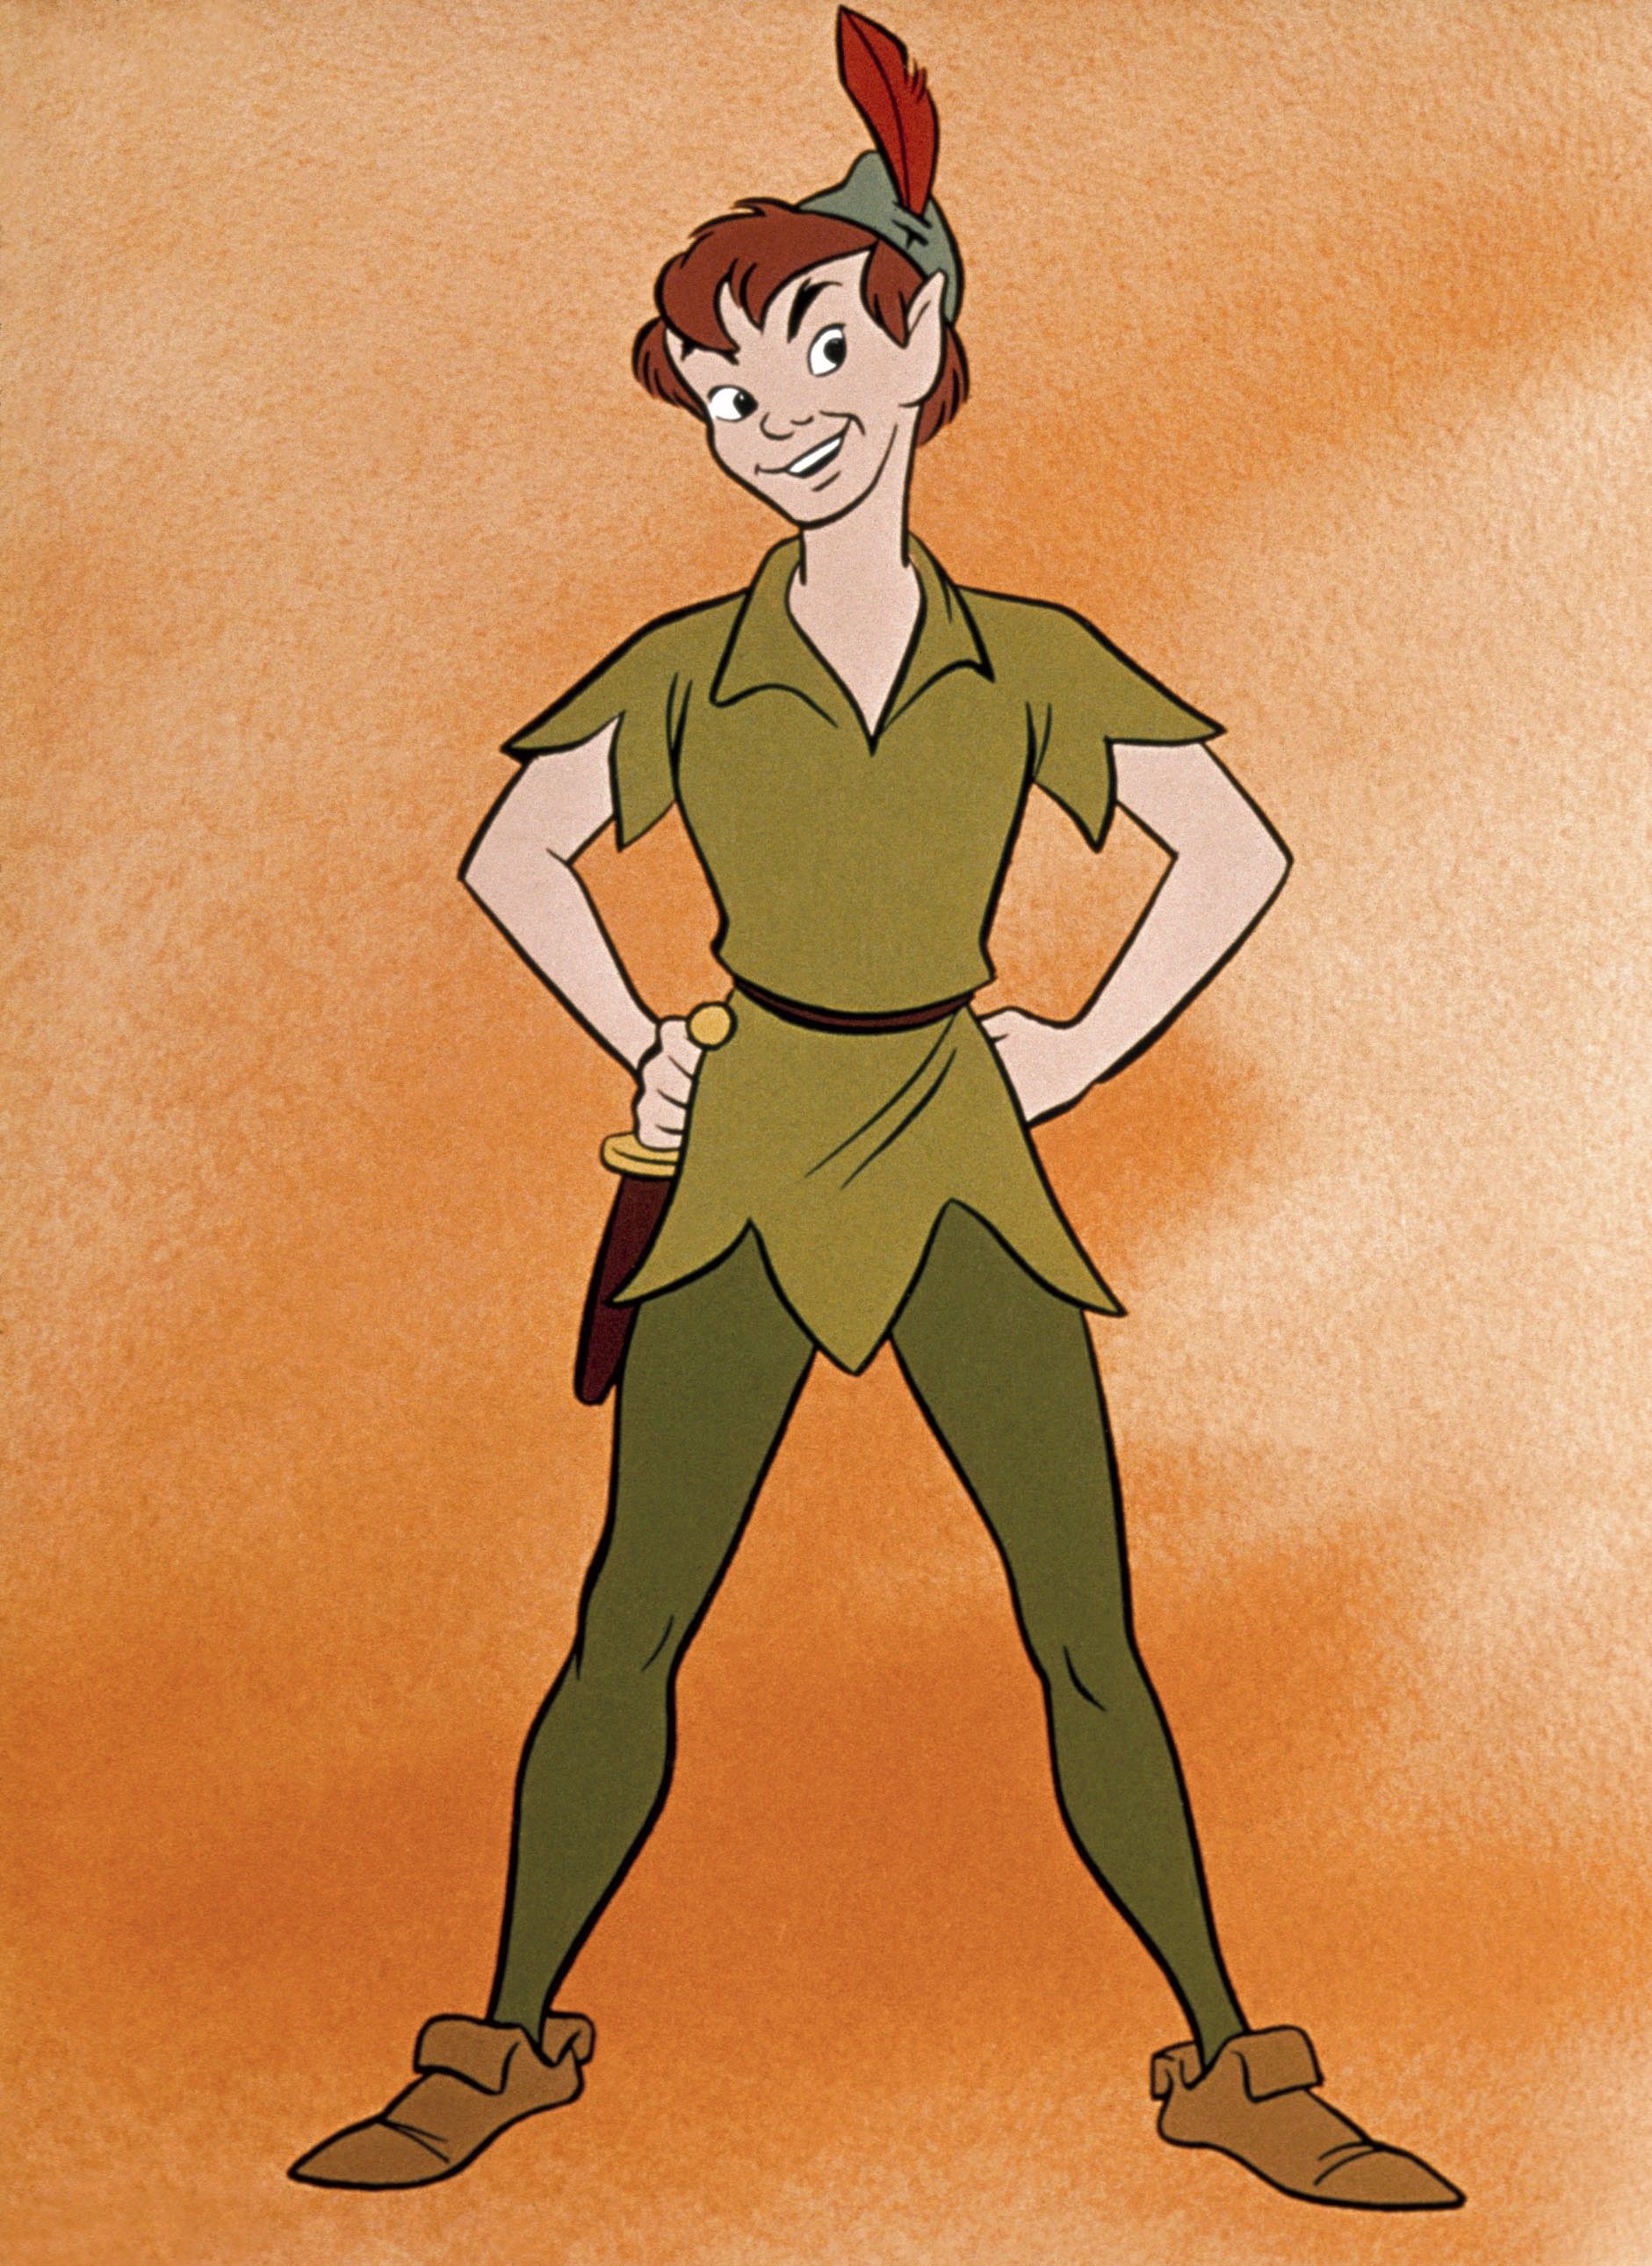 peter pan syndrom test